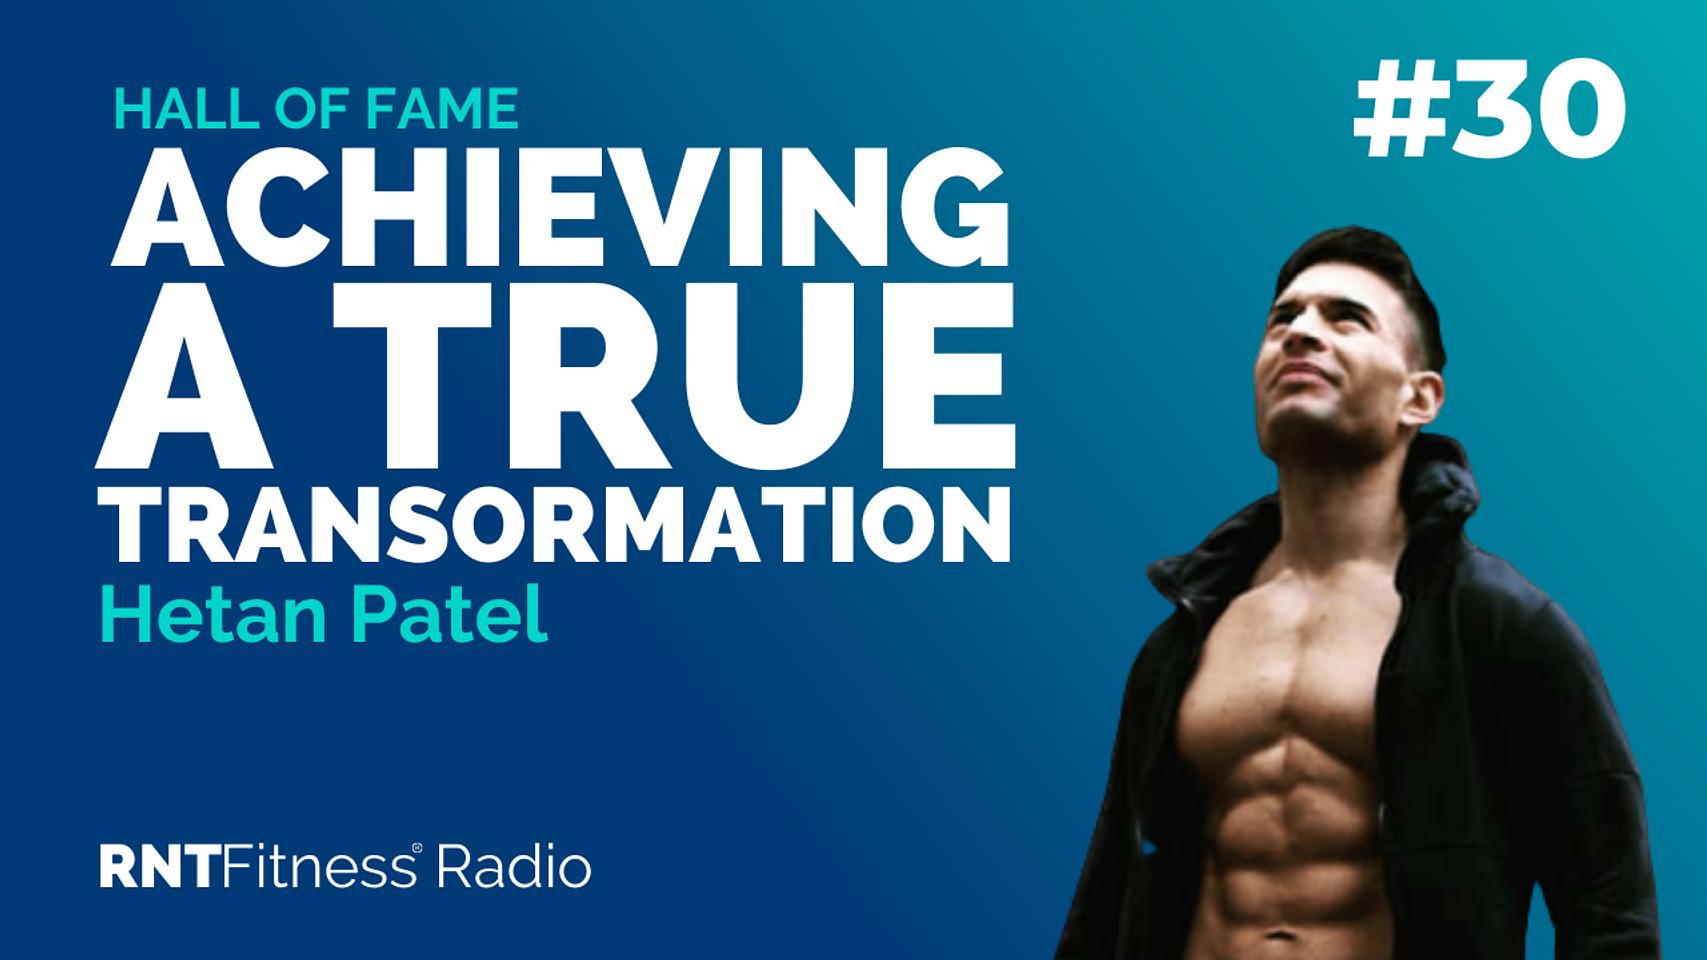 Ep. 30 - Hall of Fame | Hetan Patel - How He Achieve A True Transformation